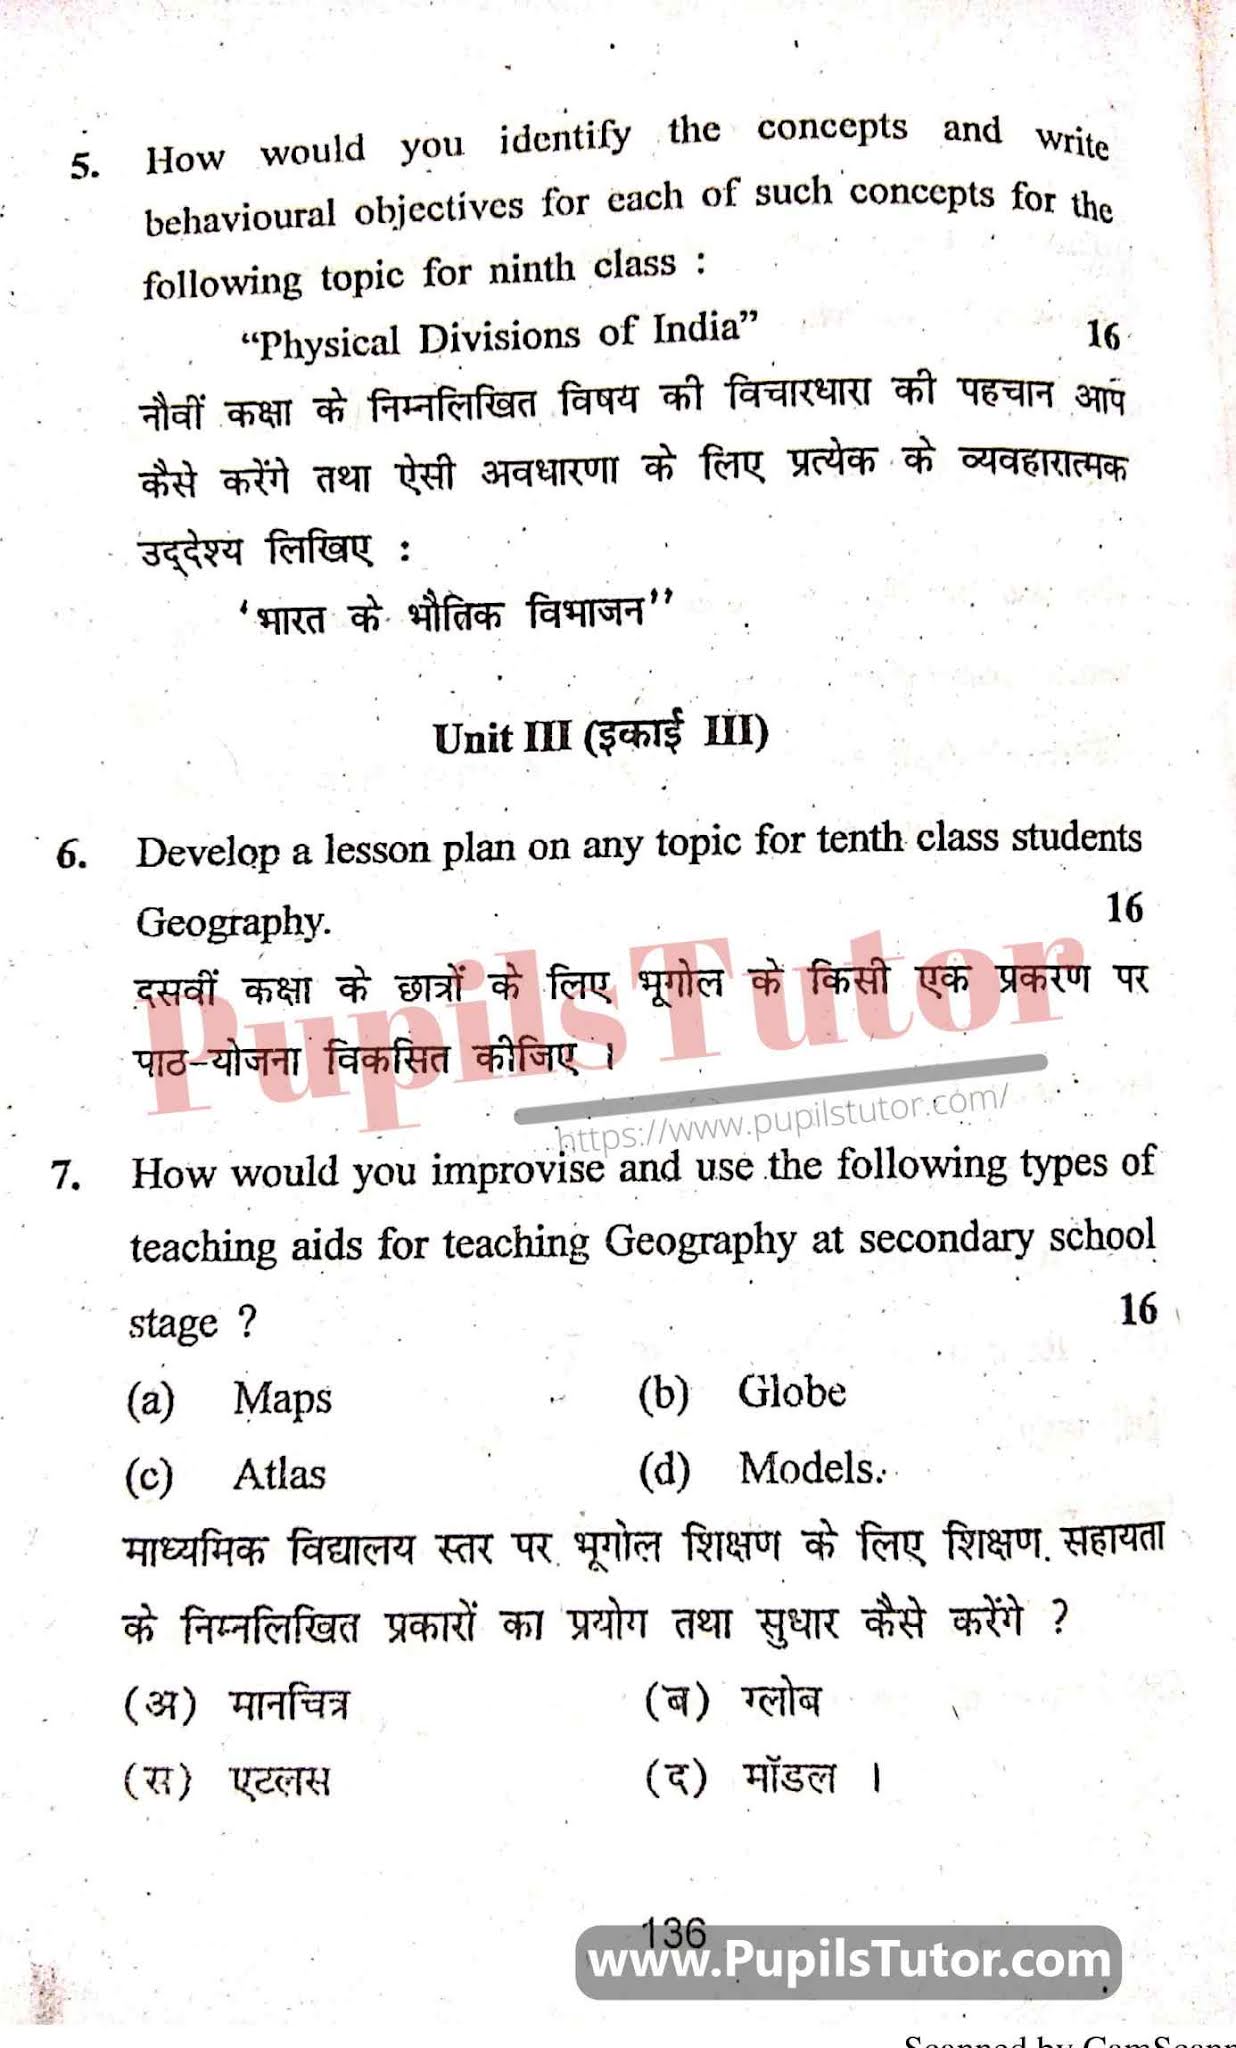 KUK (Kurukshetra University, Haryana) Pedagogy Of Geography Question Paper 2019 For B.Ed 1st And 2nd Year And All The 4 Semesters In English And Hindi Medium Free Download PDF - Page 3 - pupilstutor